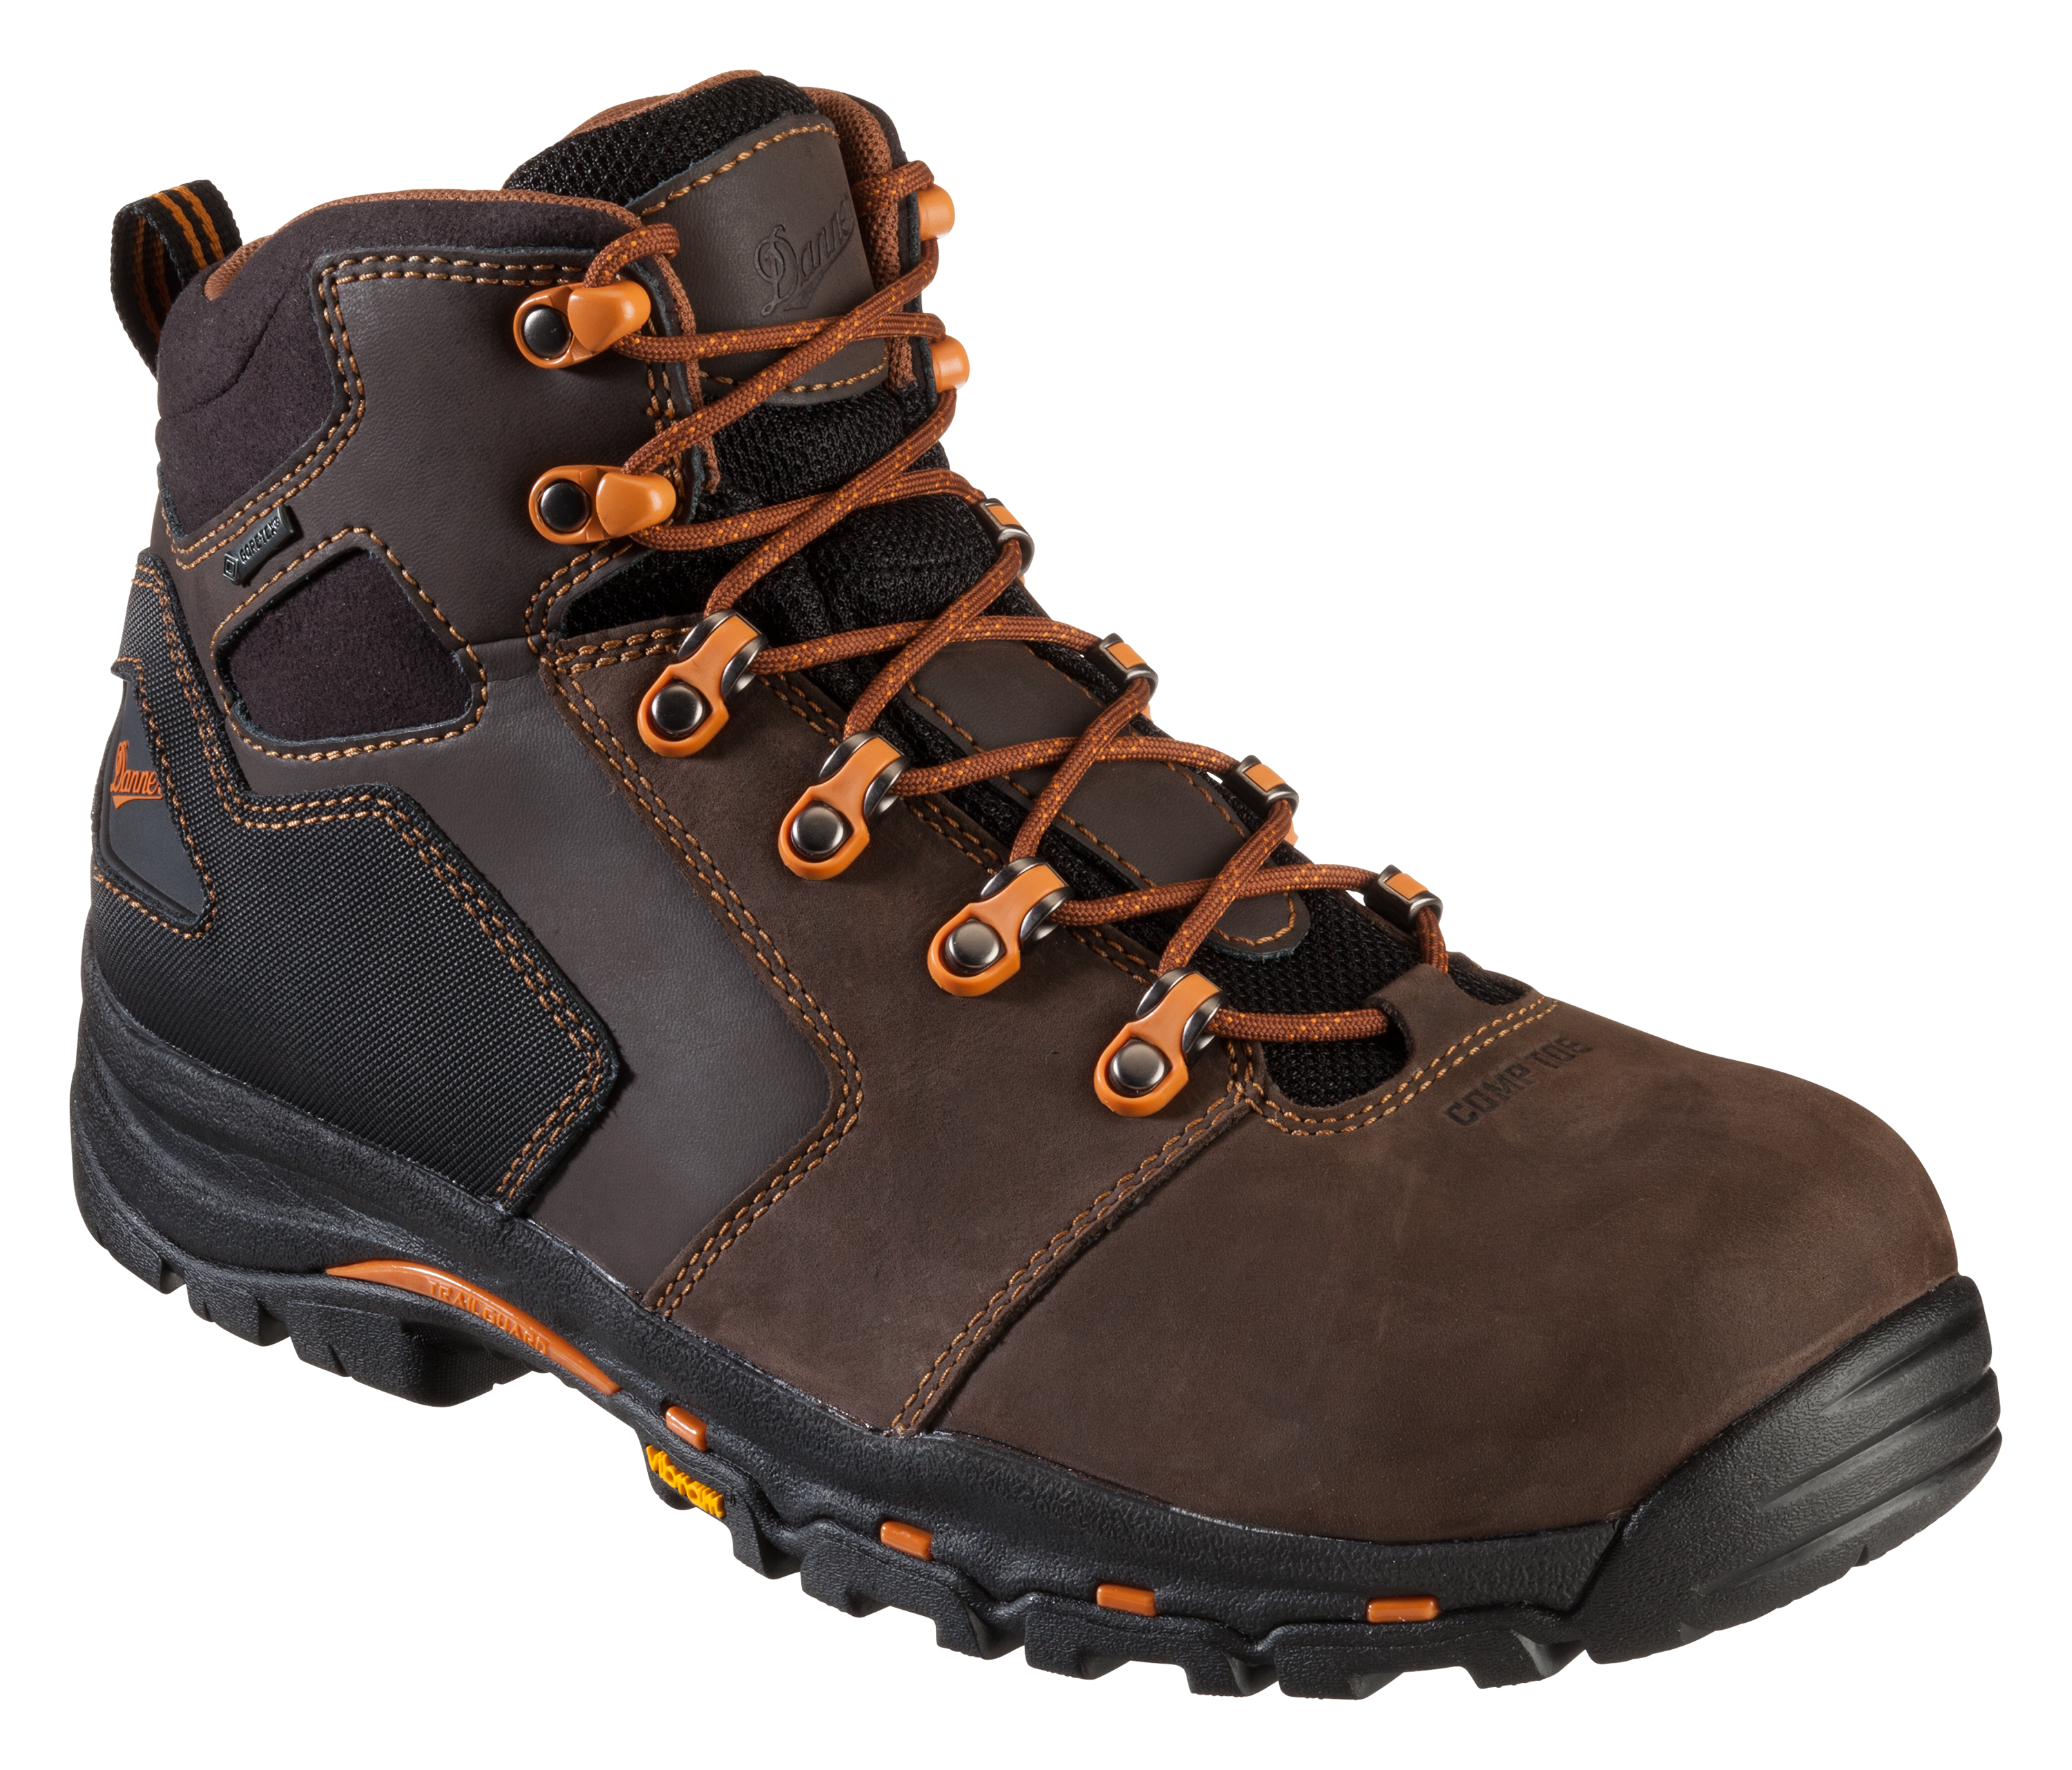 Danner Vicious GORE-TEX Non-Metallic Safety Toe Work Boots for Men - Brown - 12W